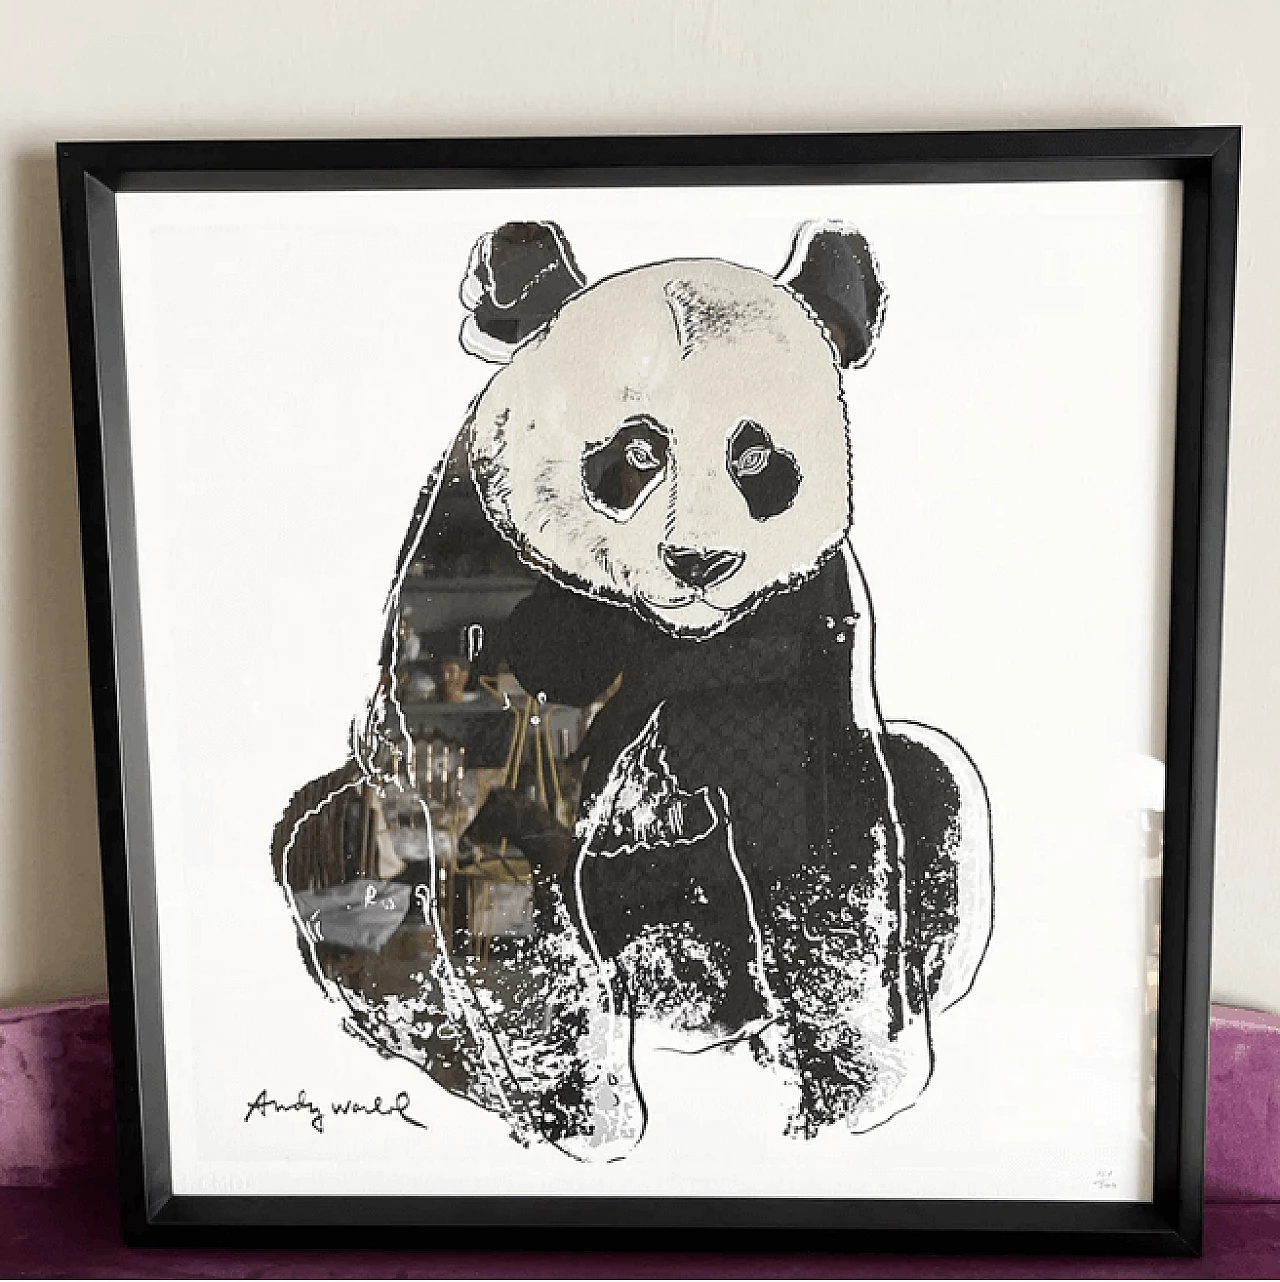 Panda, lithograph by Andy Warhol, mid-20th century 1